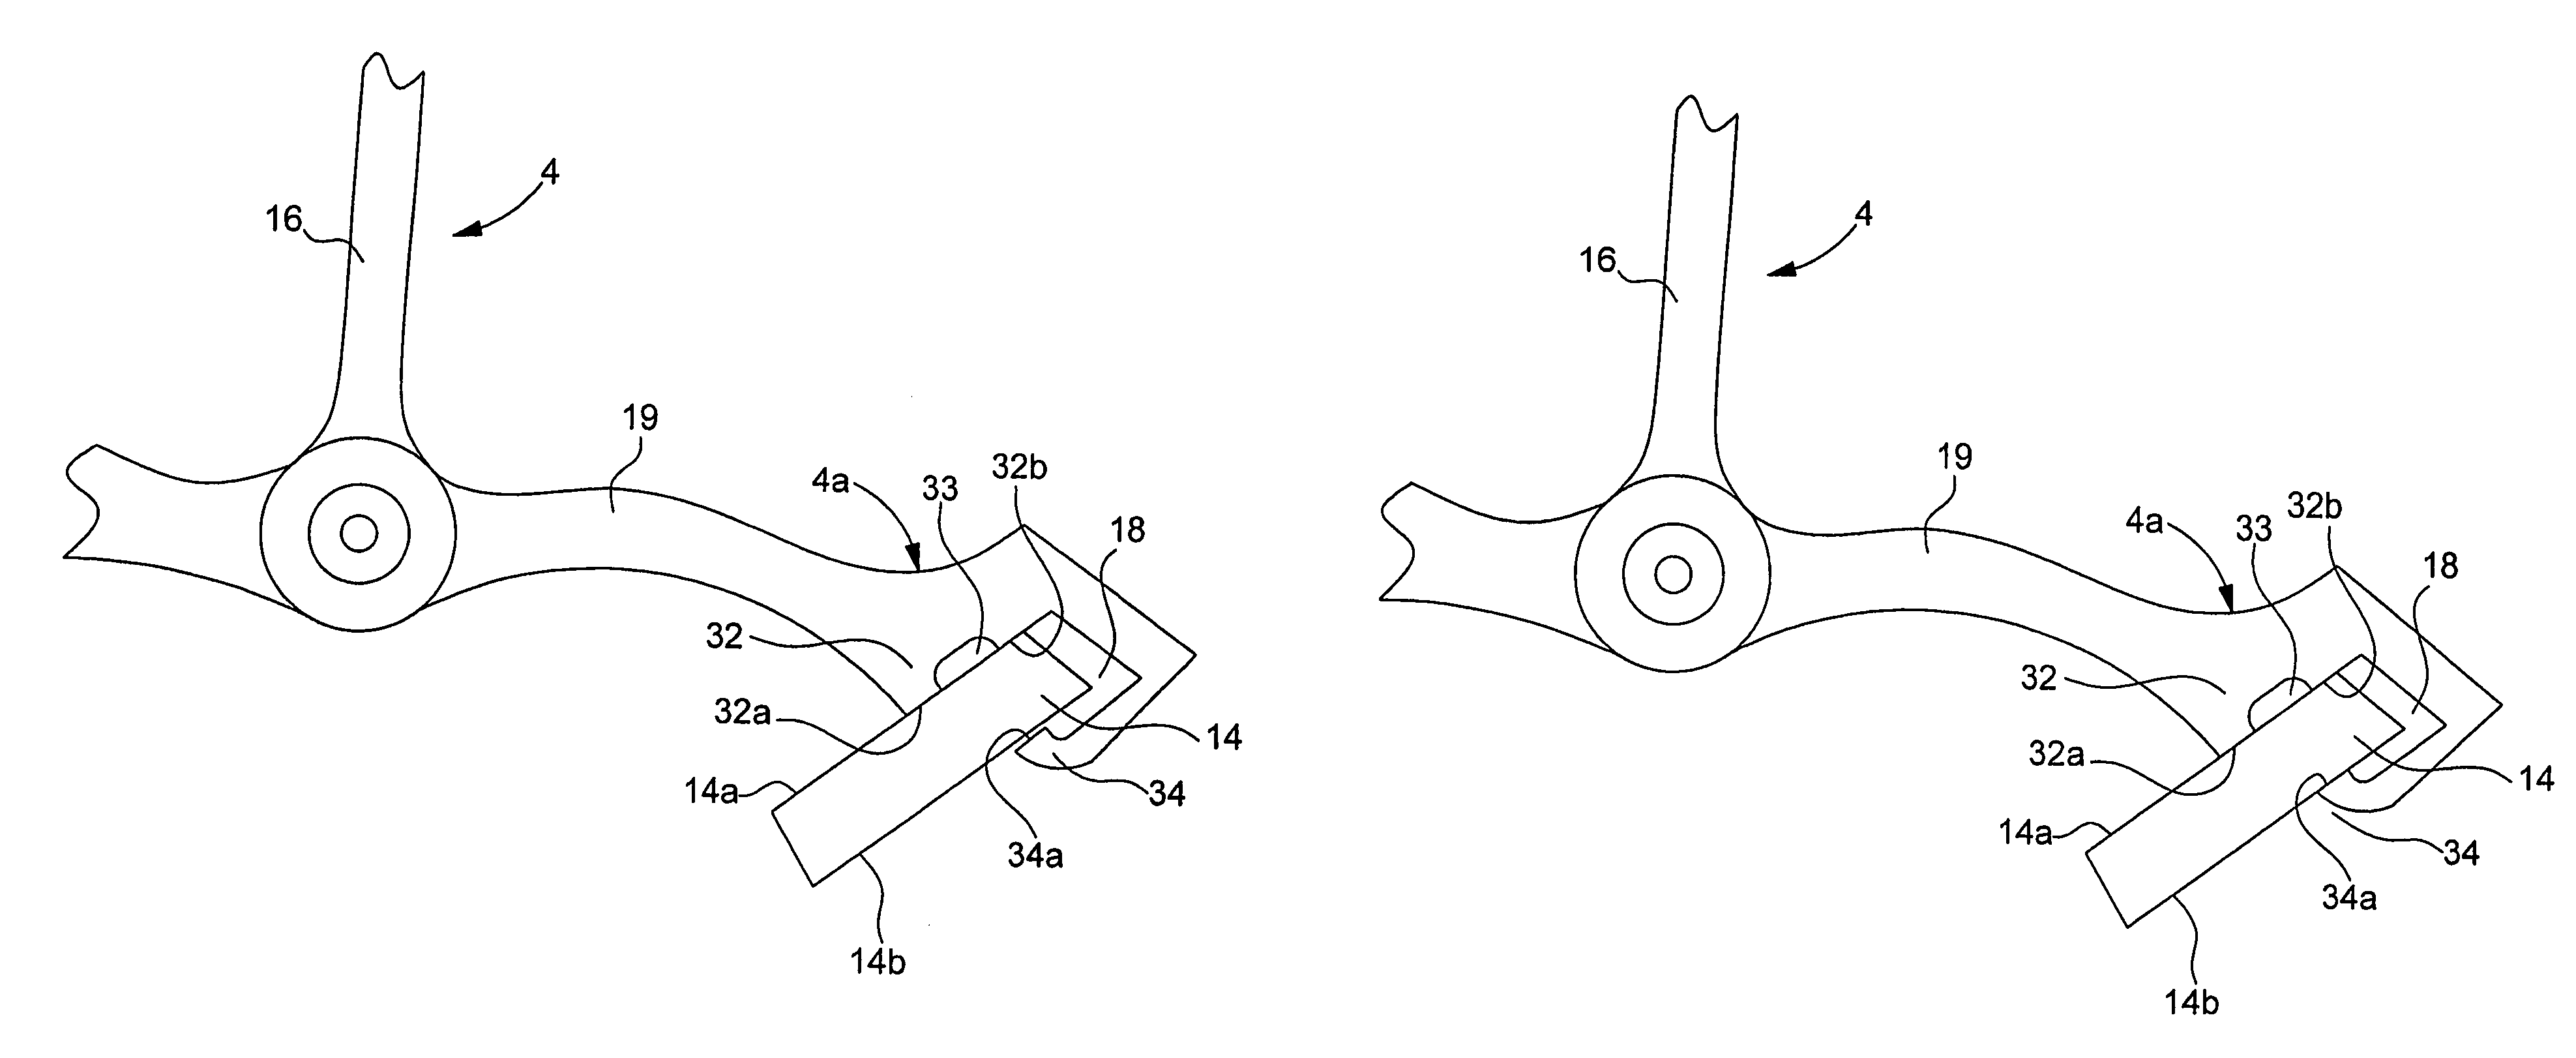 Device and method for securing a pallet-stone to an escapement pallet of a timepiece movement